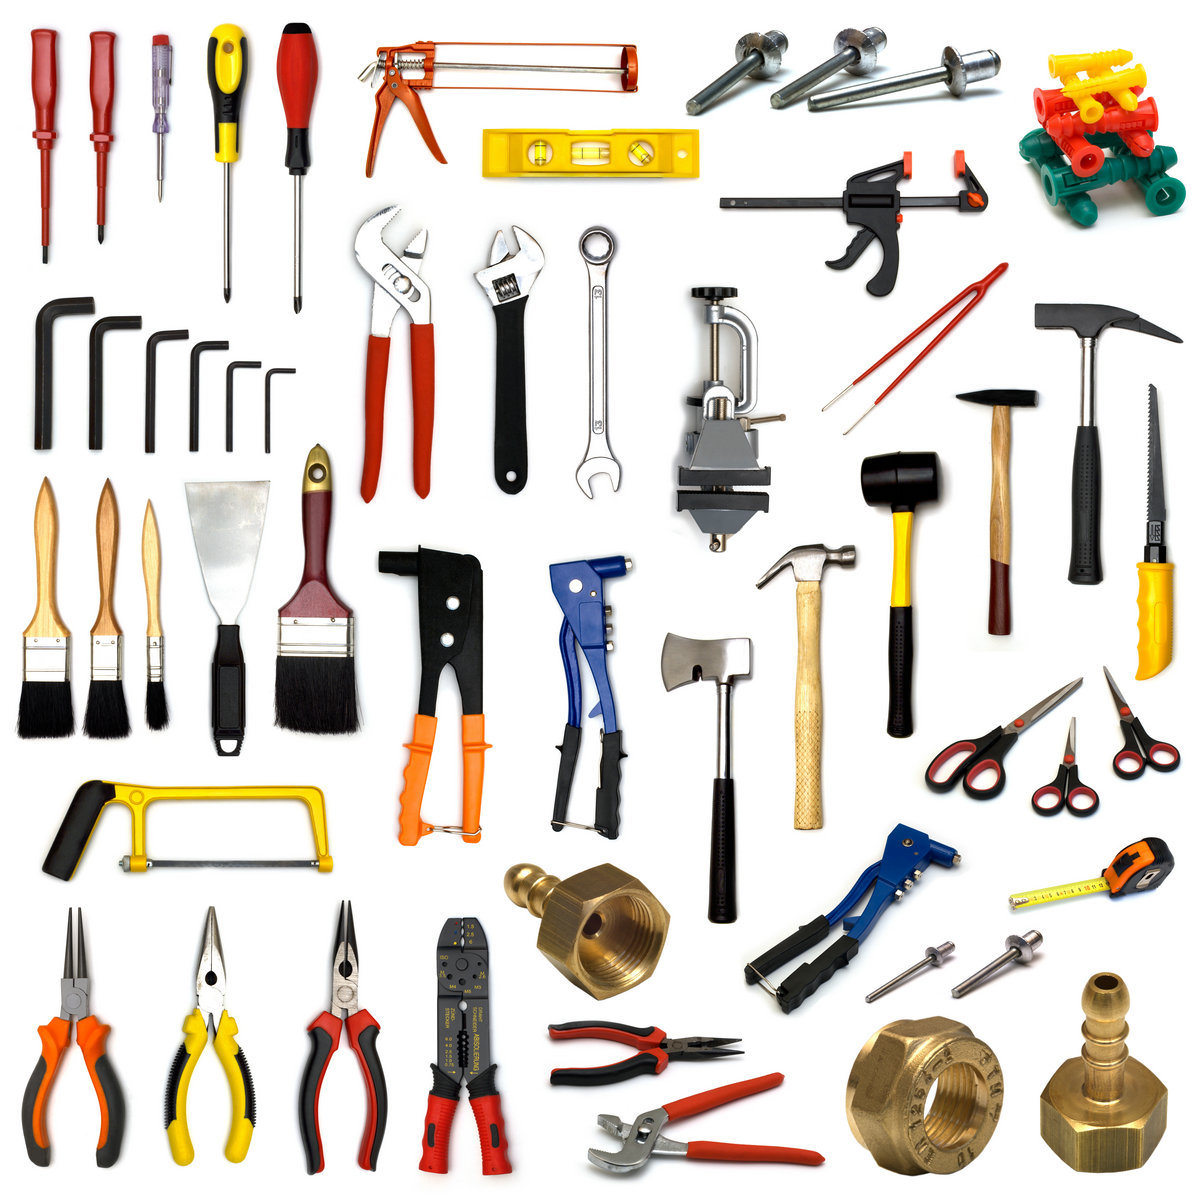 Different Types of Household and Construction Hand Tool